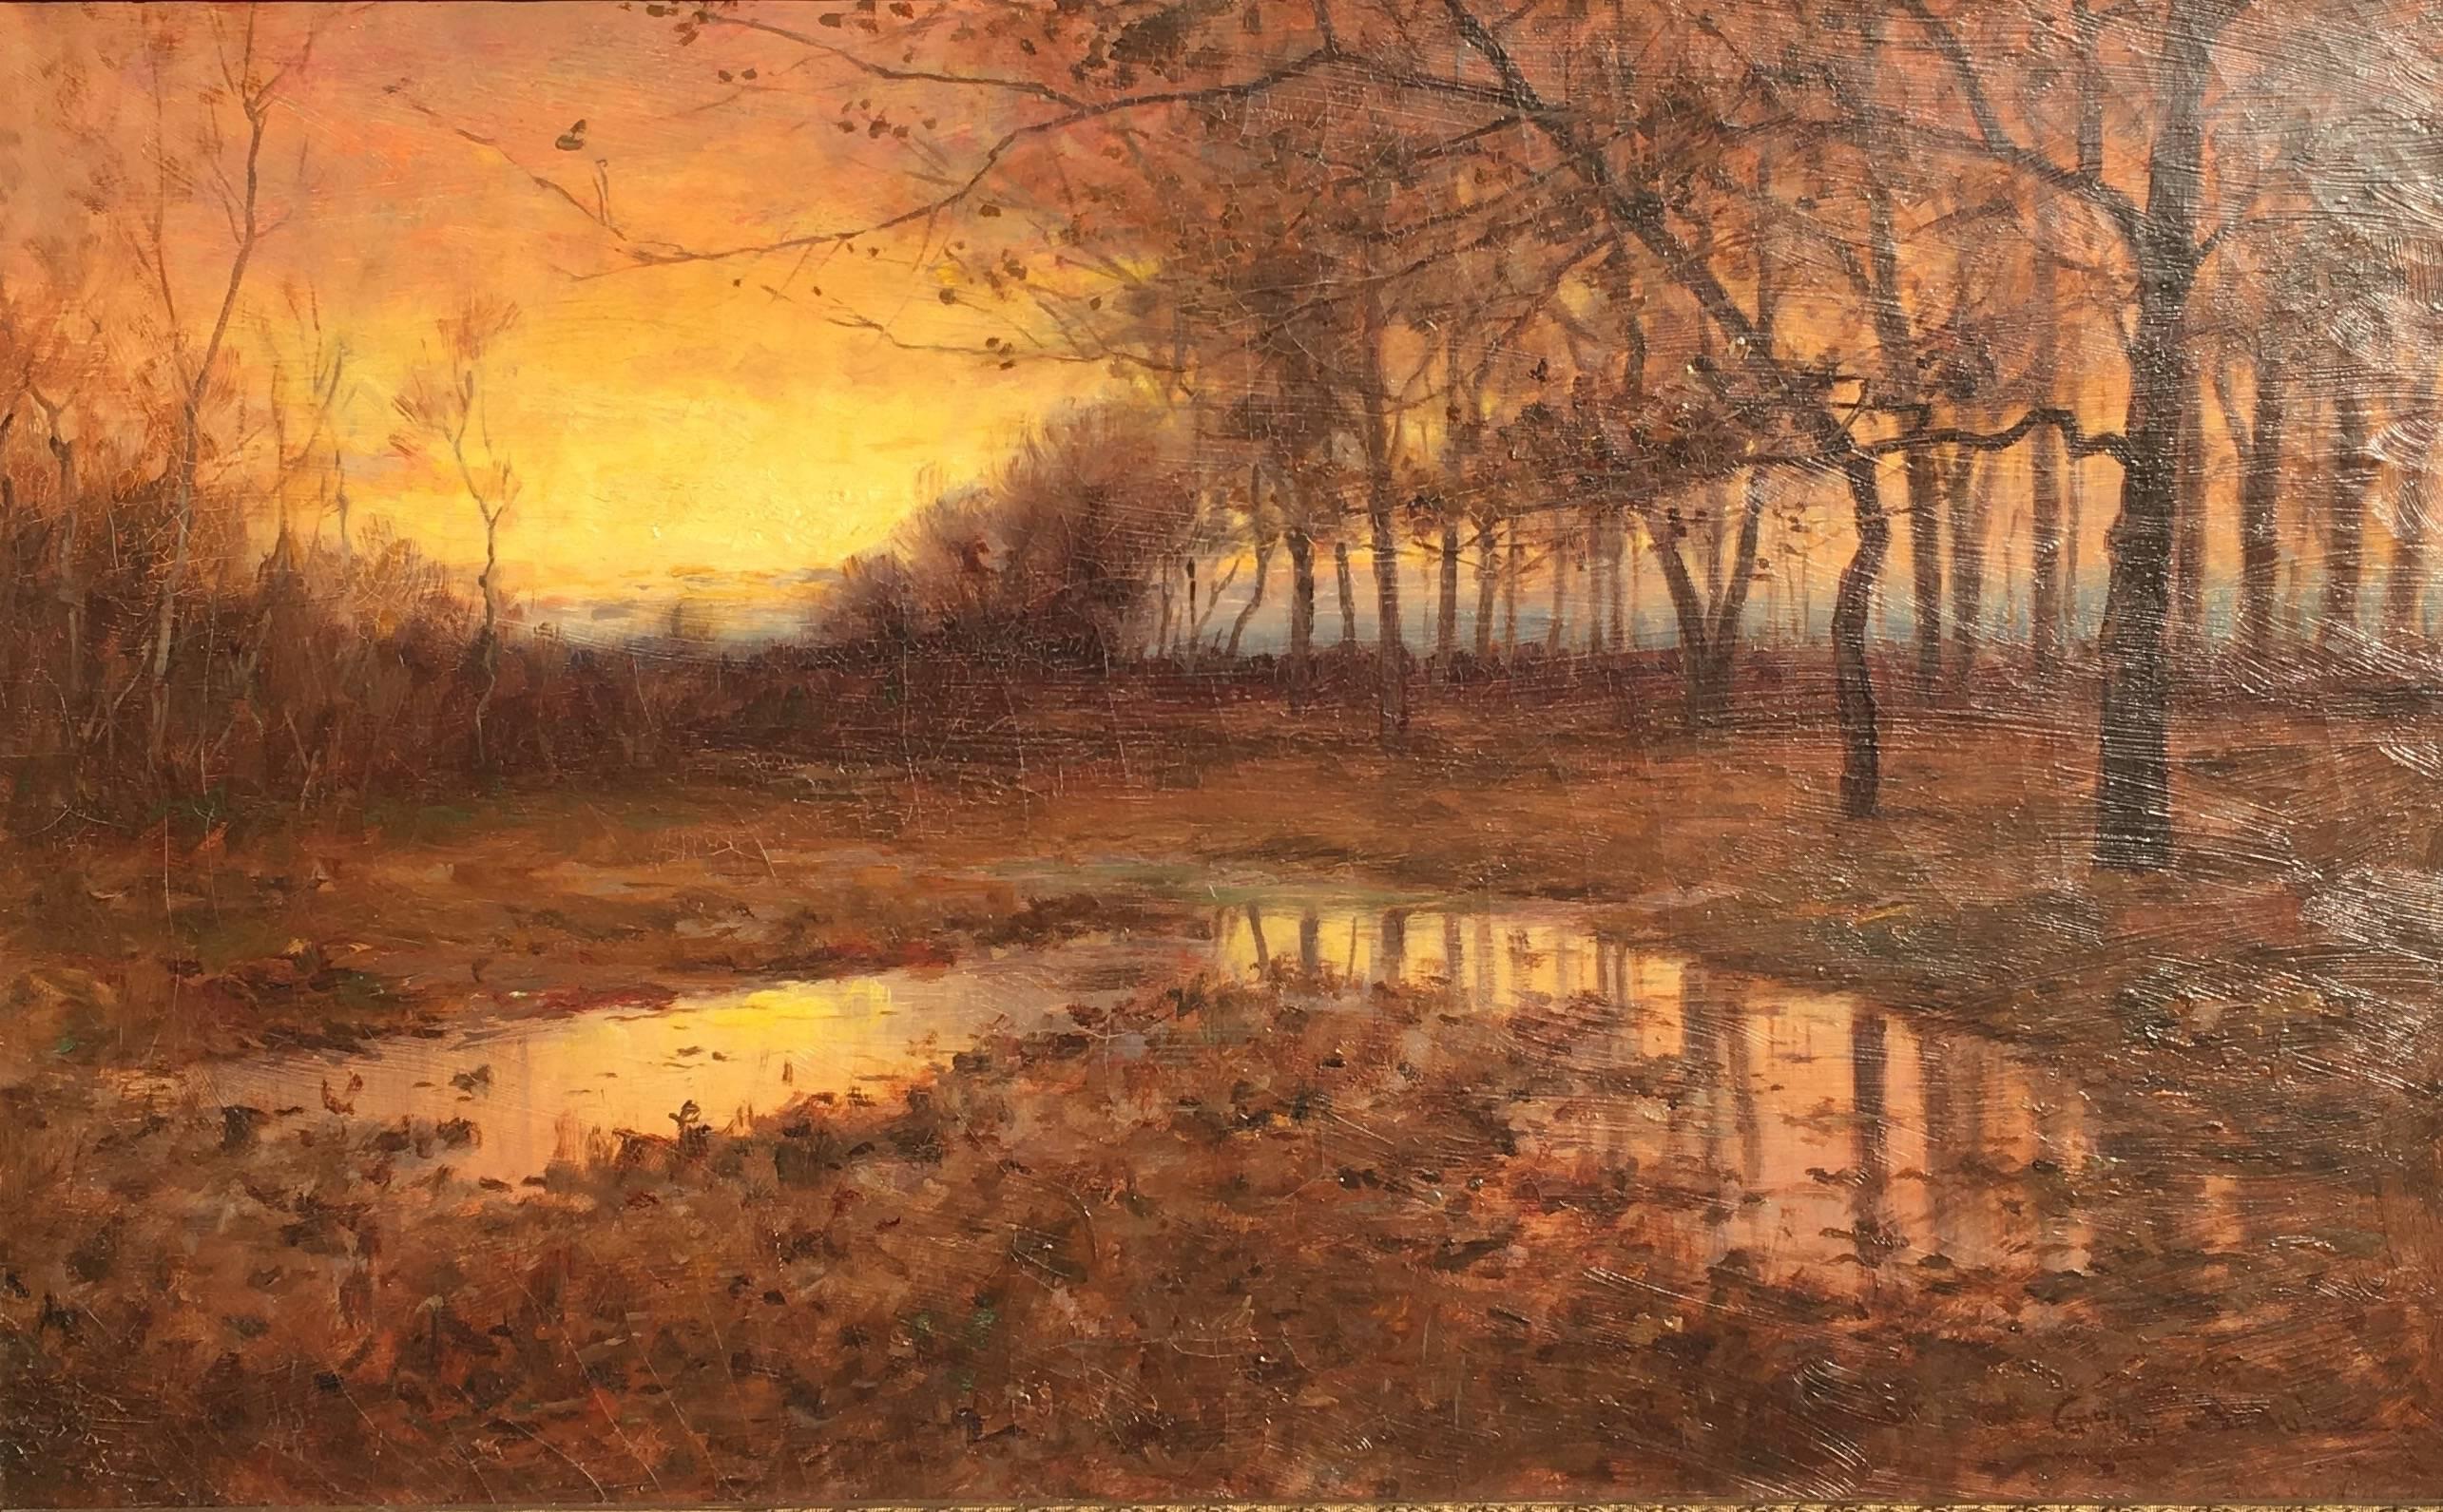 Twilight Shadows - Painting by George Schultz